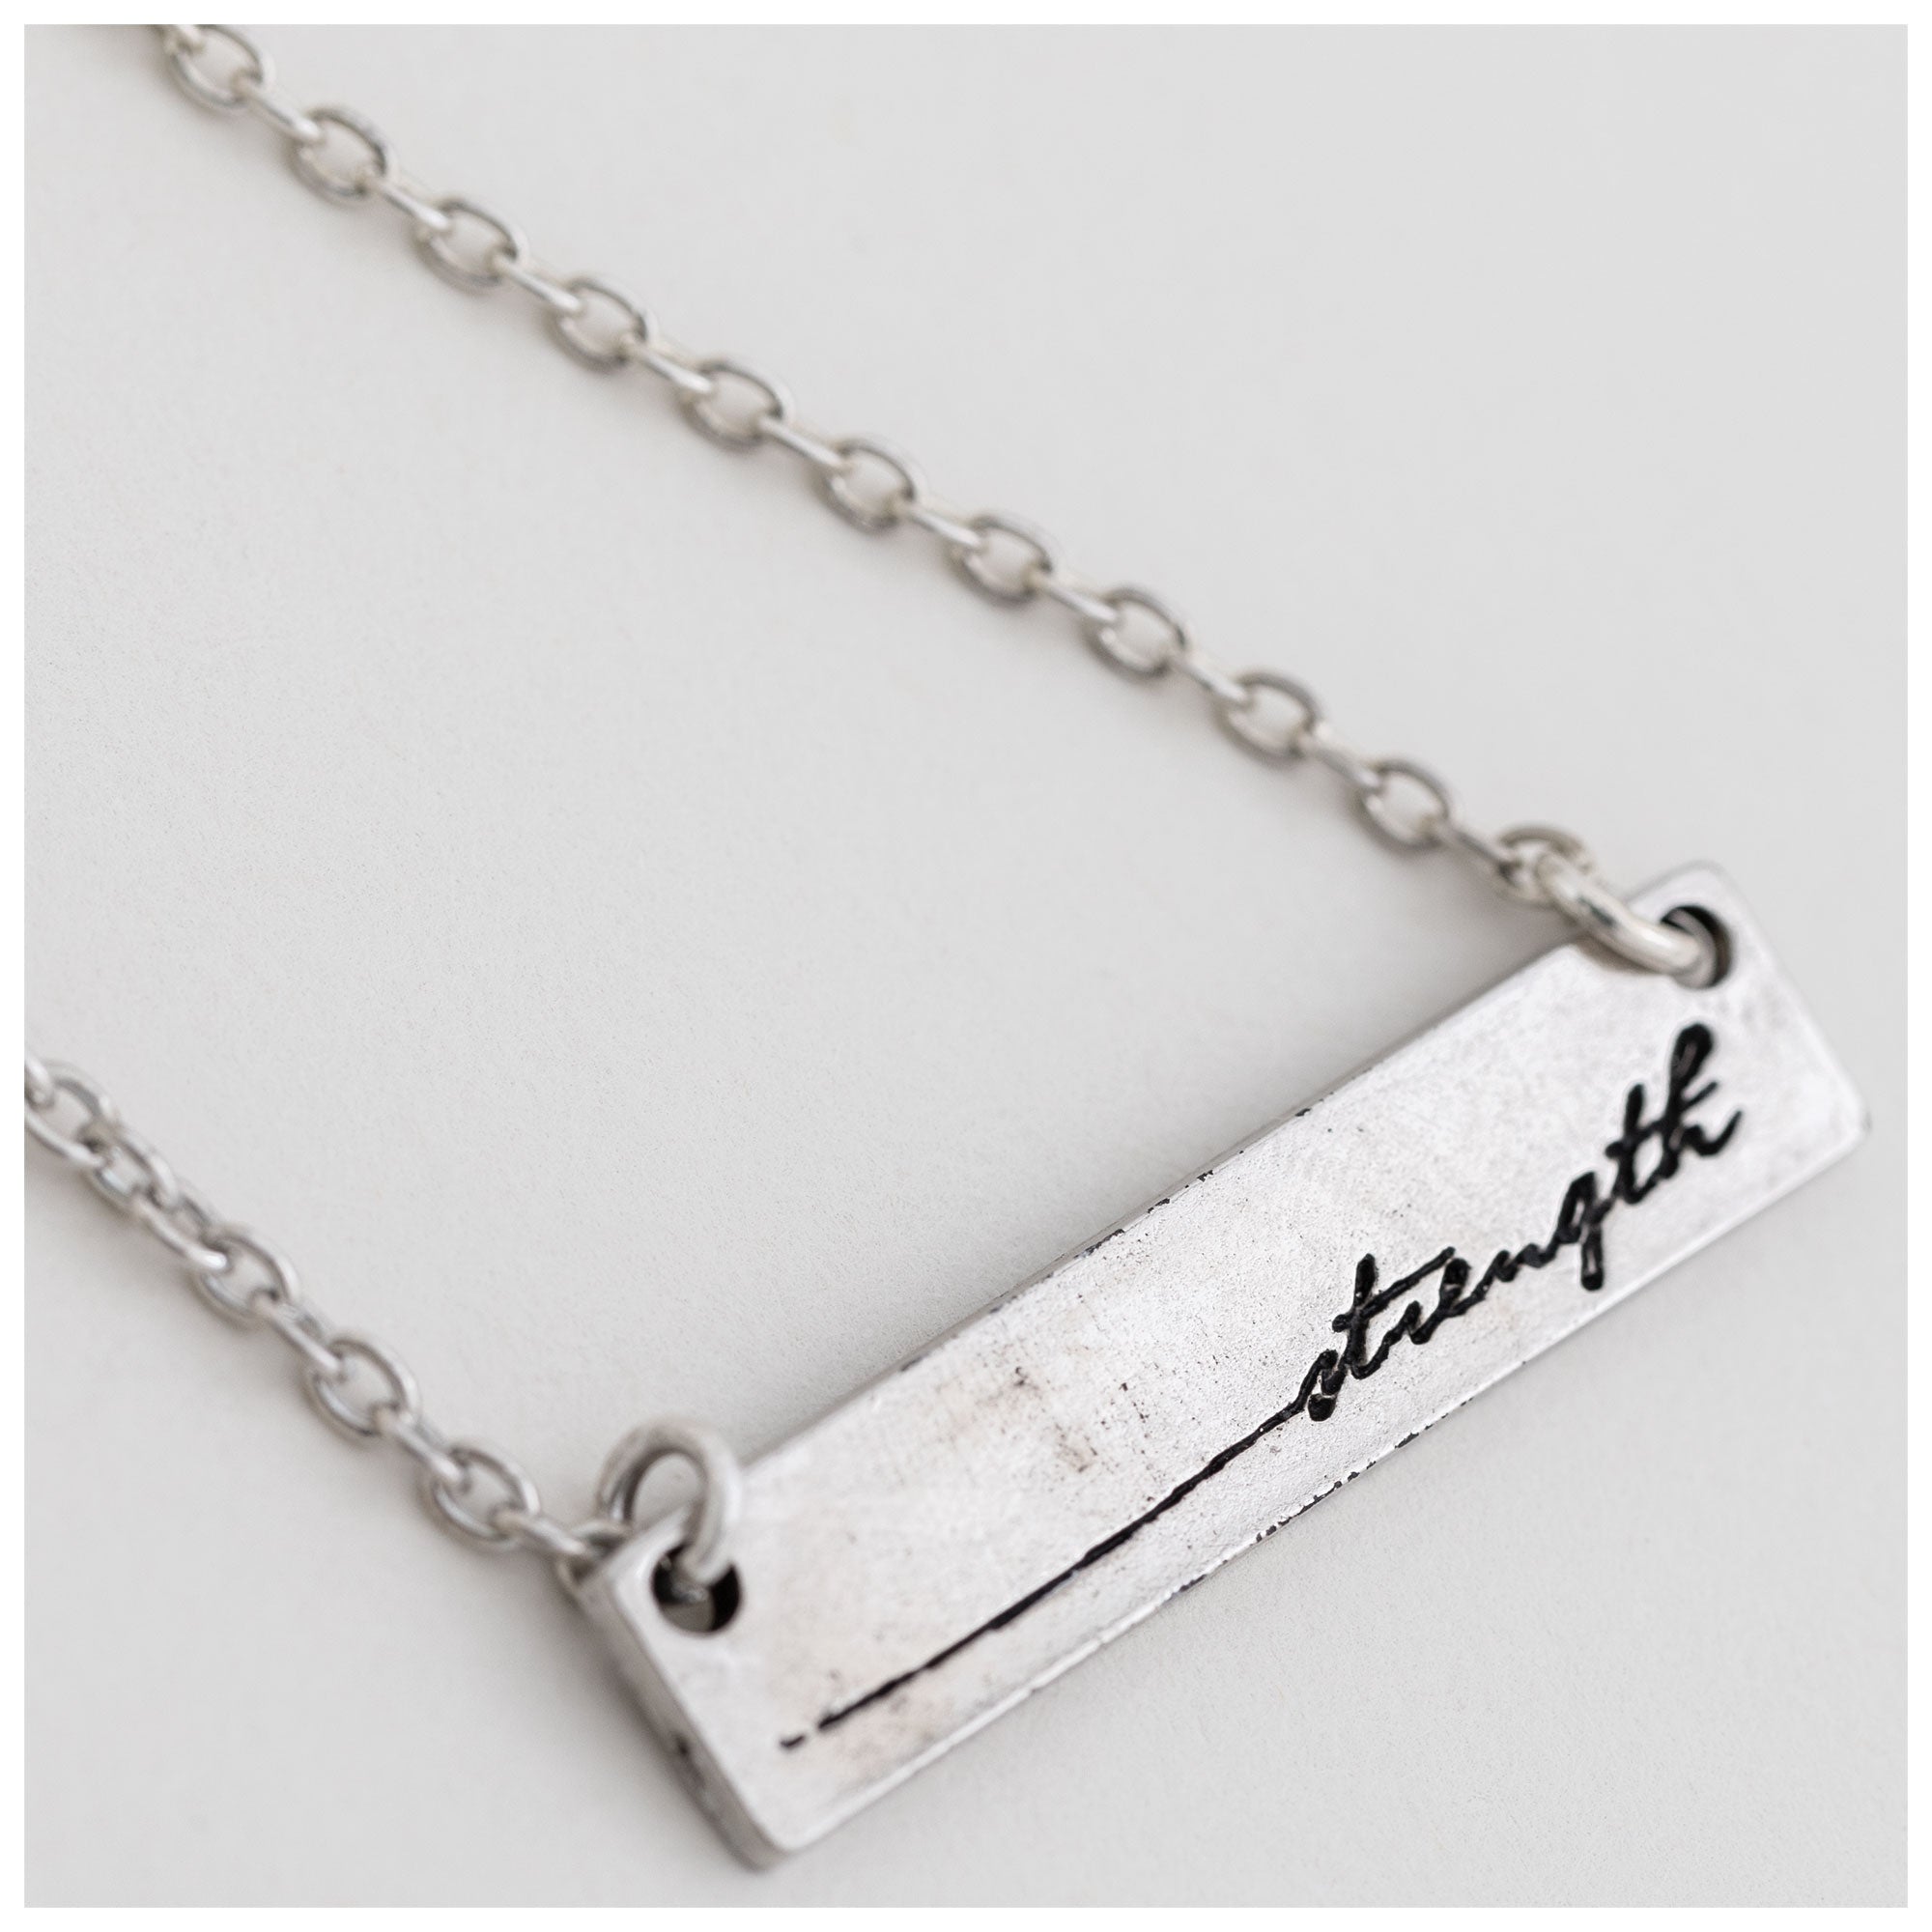 Life's Gifts Necklace - Strength